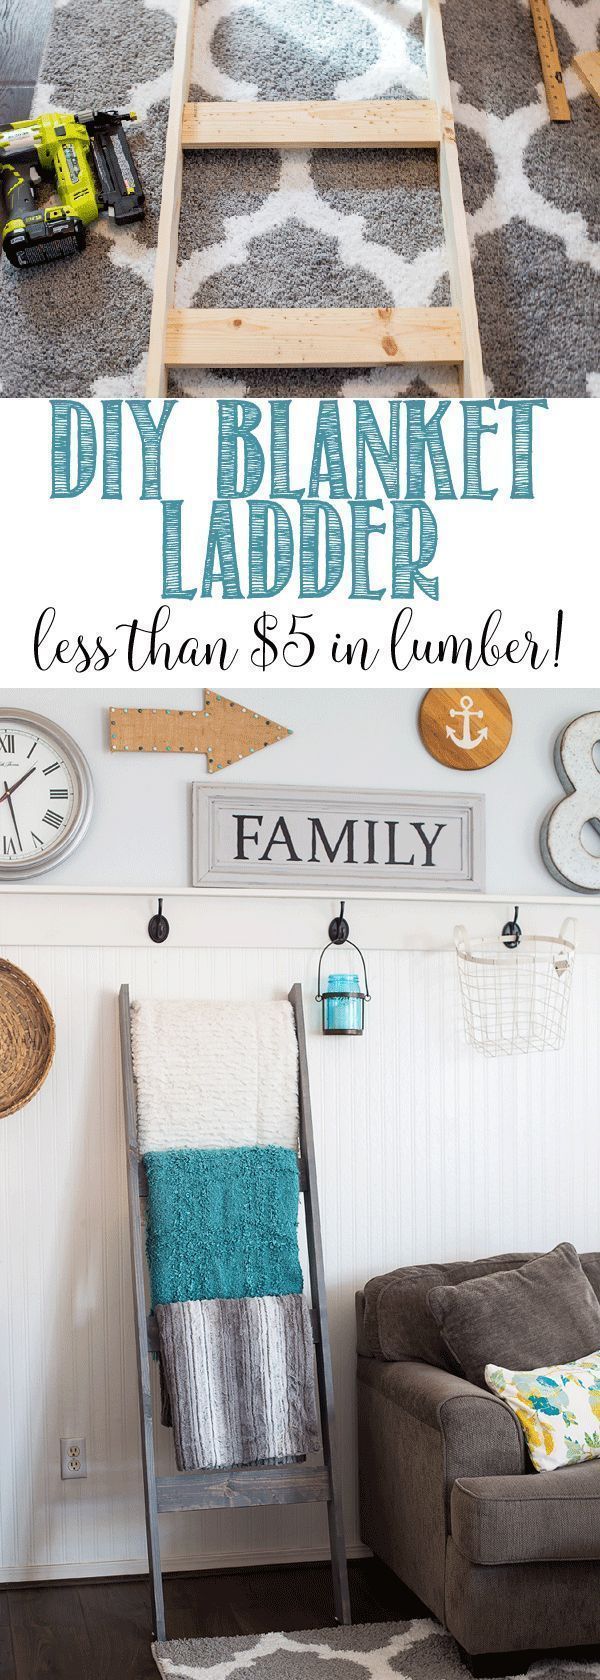 DIY Blanket Ladder for less than $5 in lumber!!!!  Great step by step tutorial s...